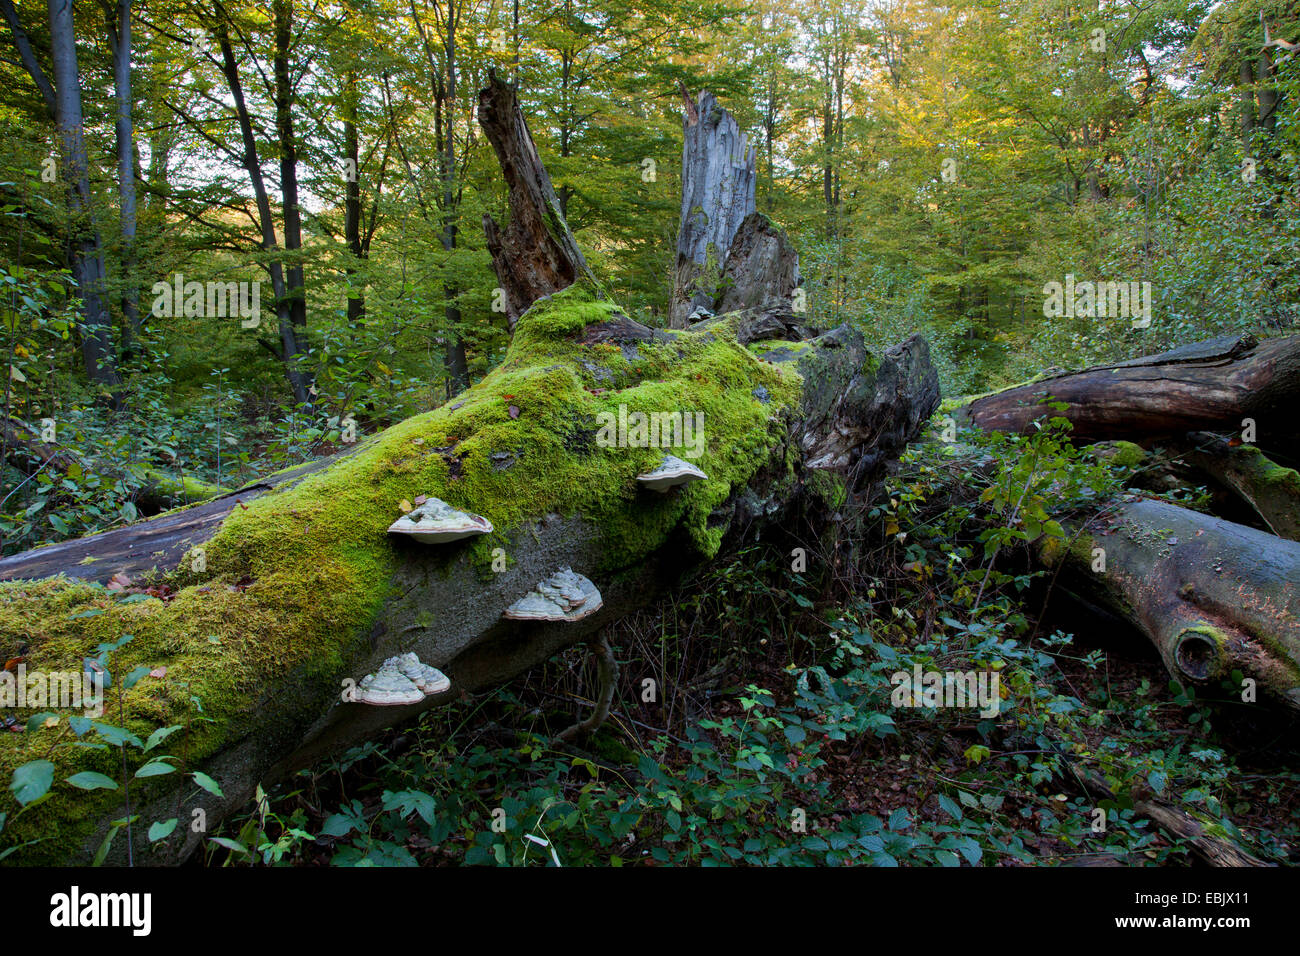 common beech (Fagus sylvatica), dead tree in Sababurg forest, Germany, Hesse, Reinhardswald Stock Photo